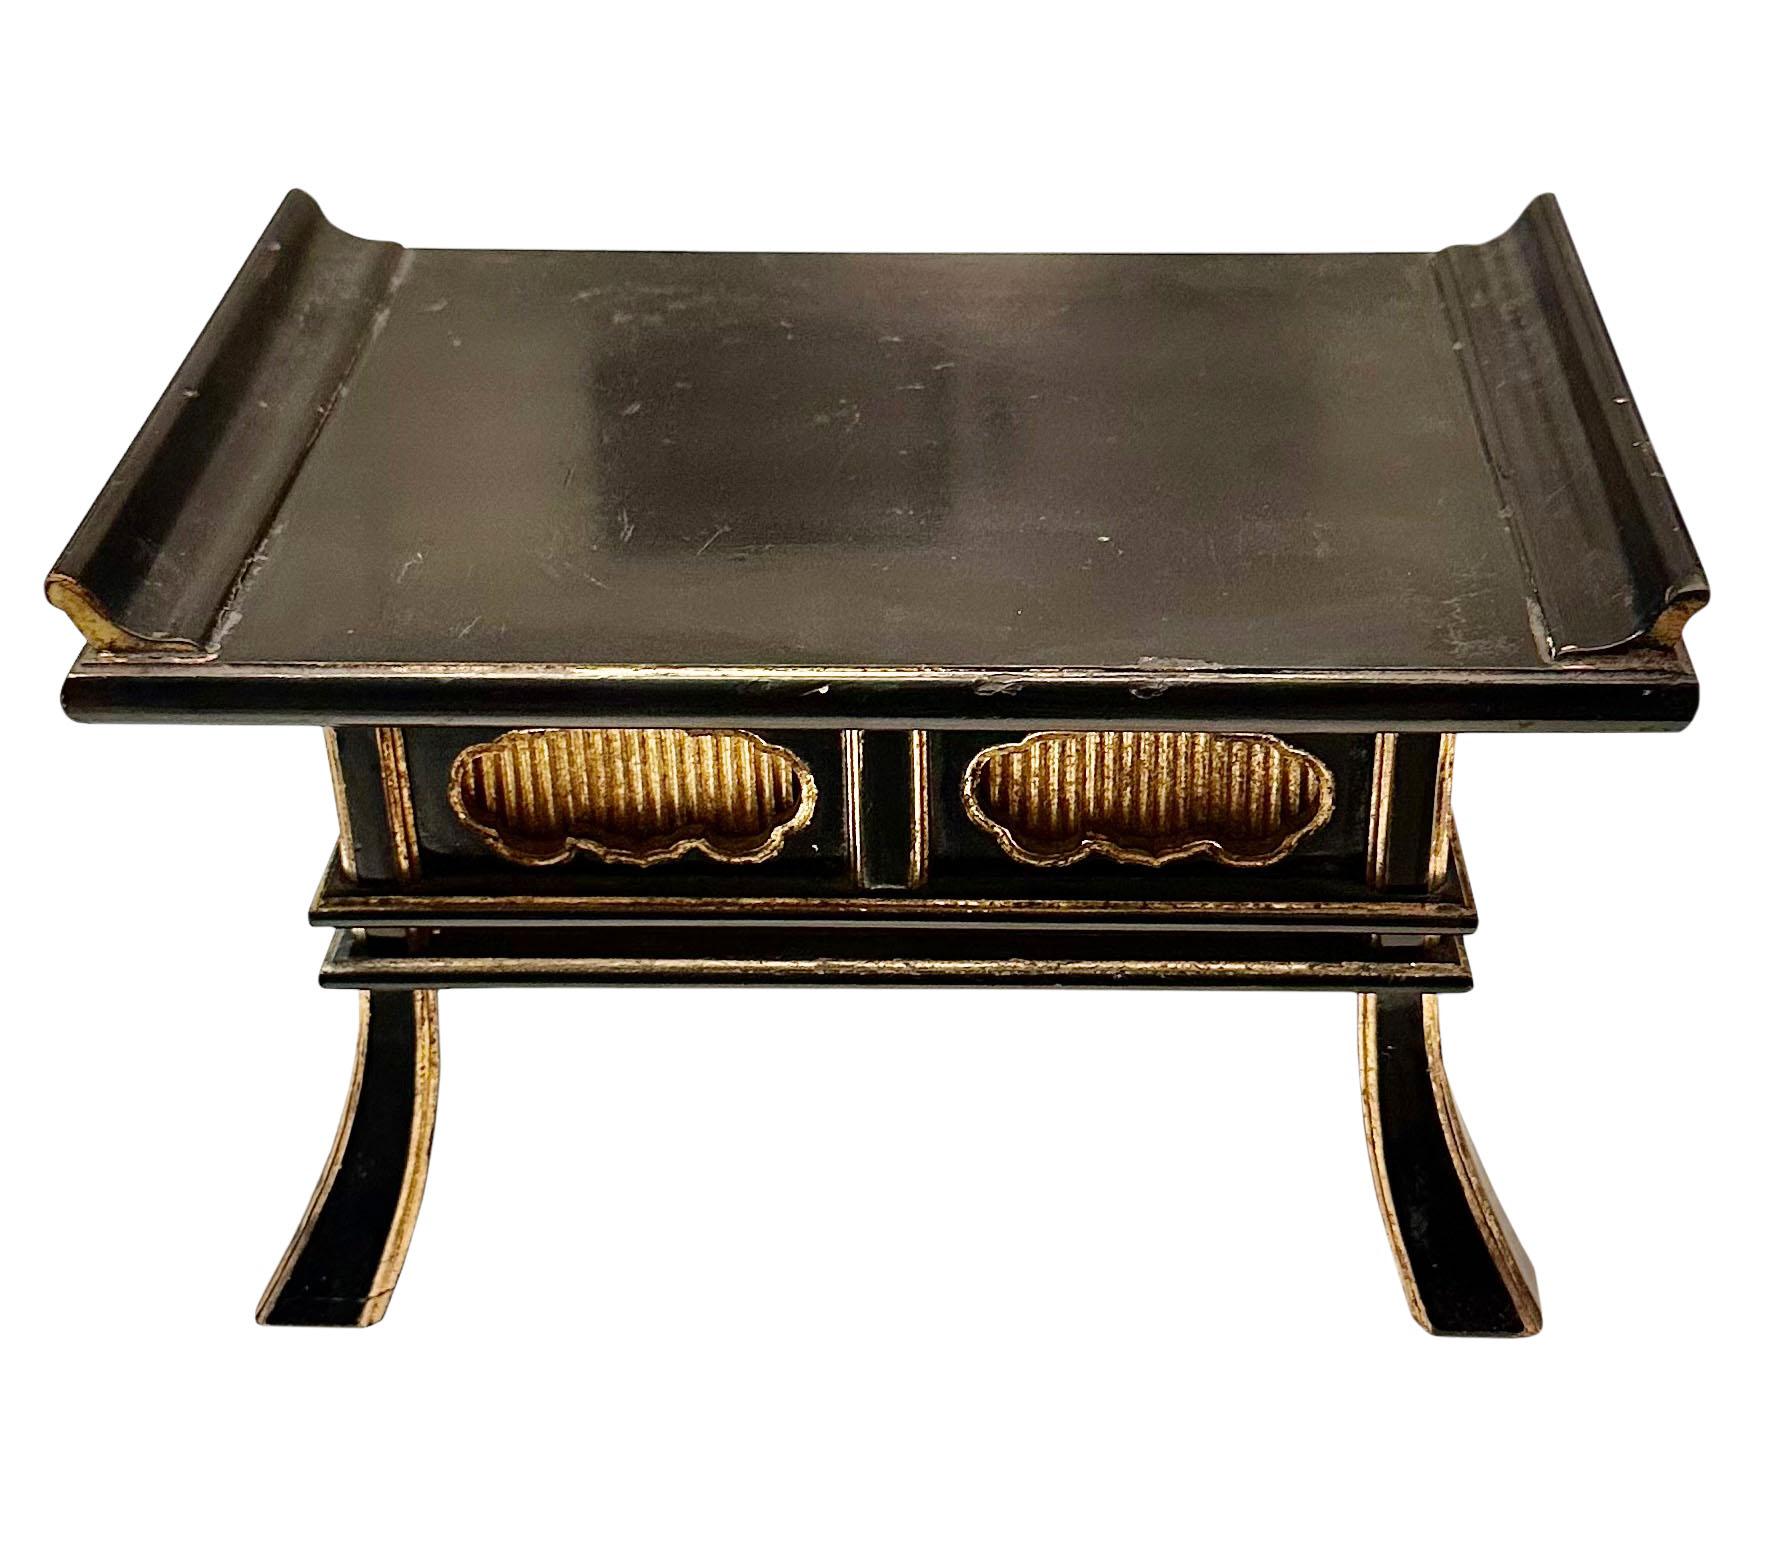 A turn of the century small Japanese black lacquer and gold gilt alter table with flared legs. in very good condition for the age and even the bottom is trimmed with gold.